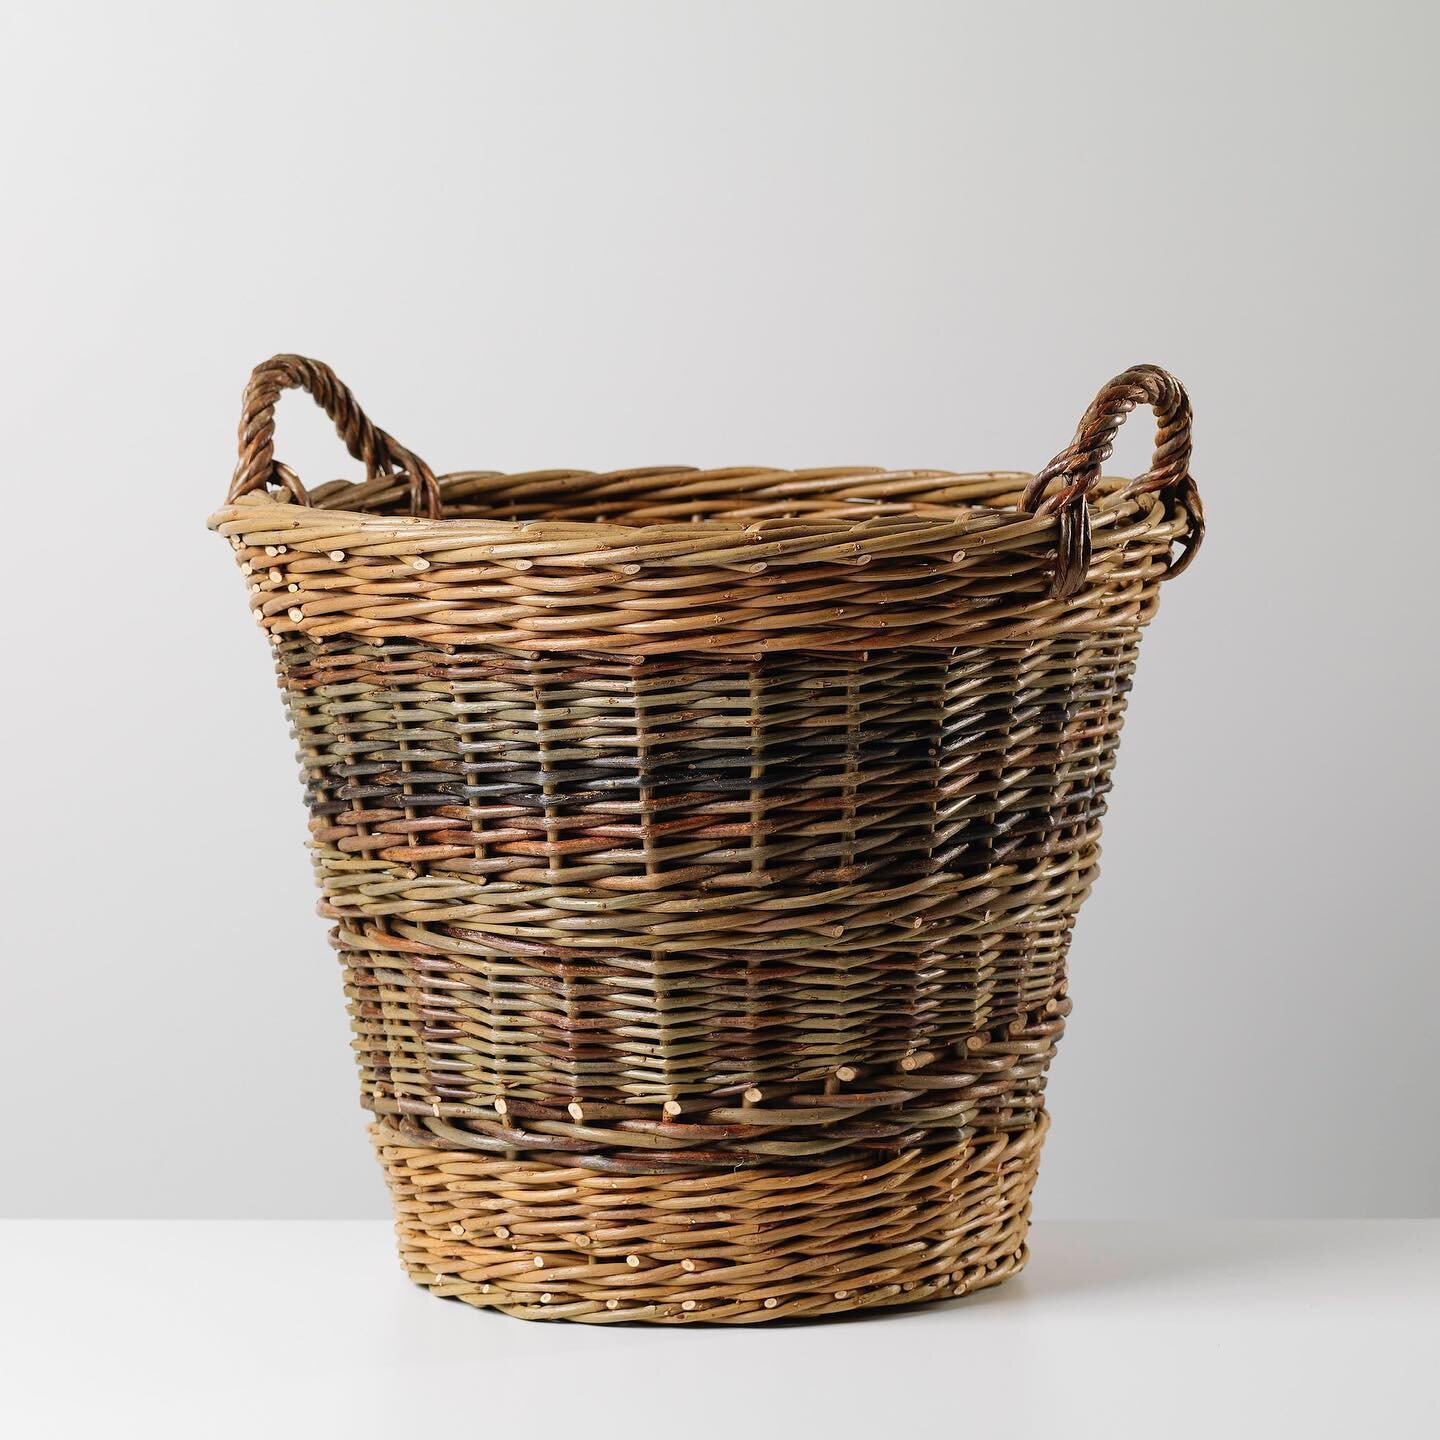 I&rsquo;ve just updated my online shop with beautiful baskets made with #scottish willow, and will be having a pick up day on 21st Dec from my studio in Edinburgh. Otherwise baskets can be posted out. 

Last day for ordering baskets to post will be F